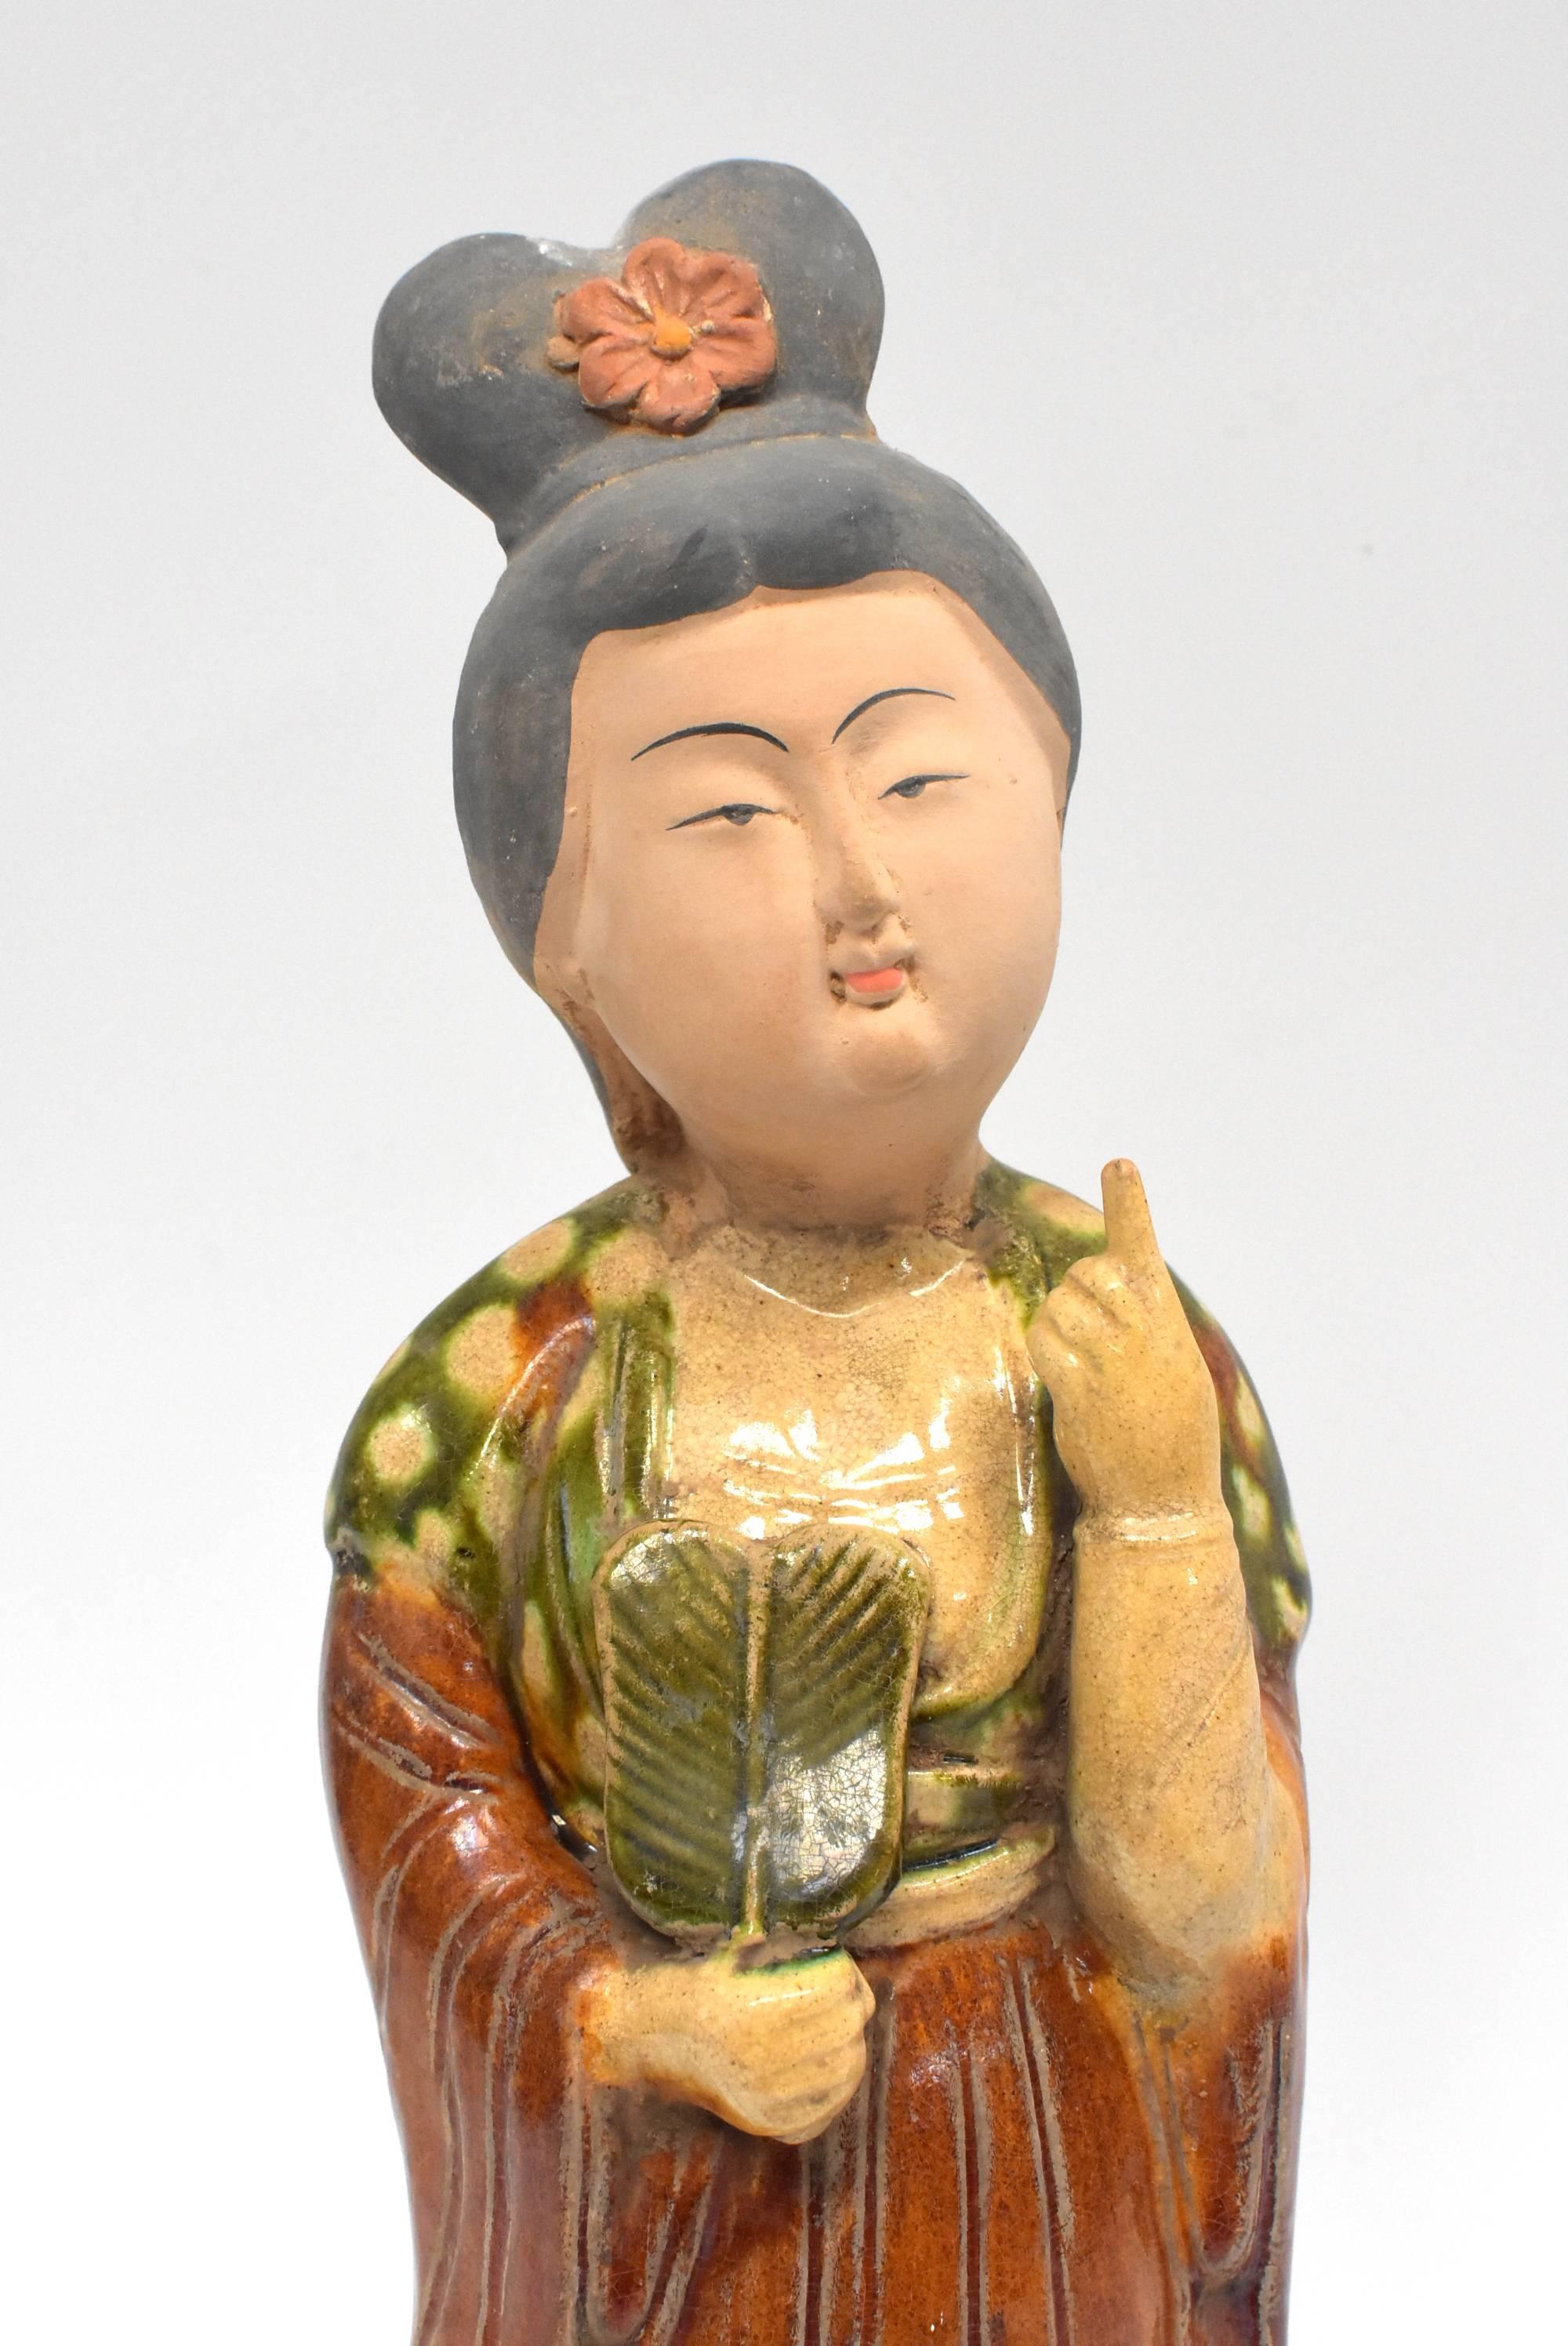 A beautiful terracotta court lady in the Chinese Tang dynasty San Cai style. Fine facial features and traditional dress and hair style. The tri-glaze is the typical green, caramel and beige. The lady's expression is peaceful and serene. Her full